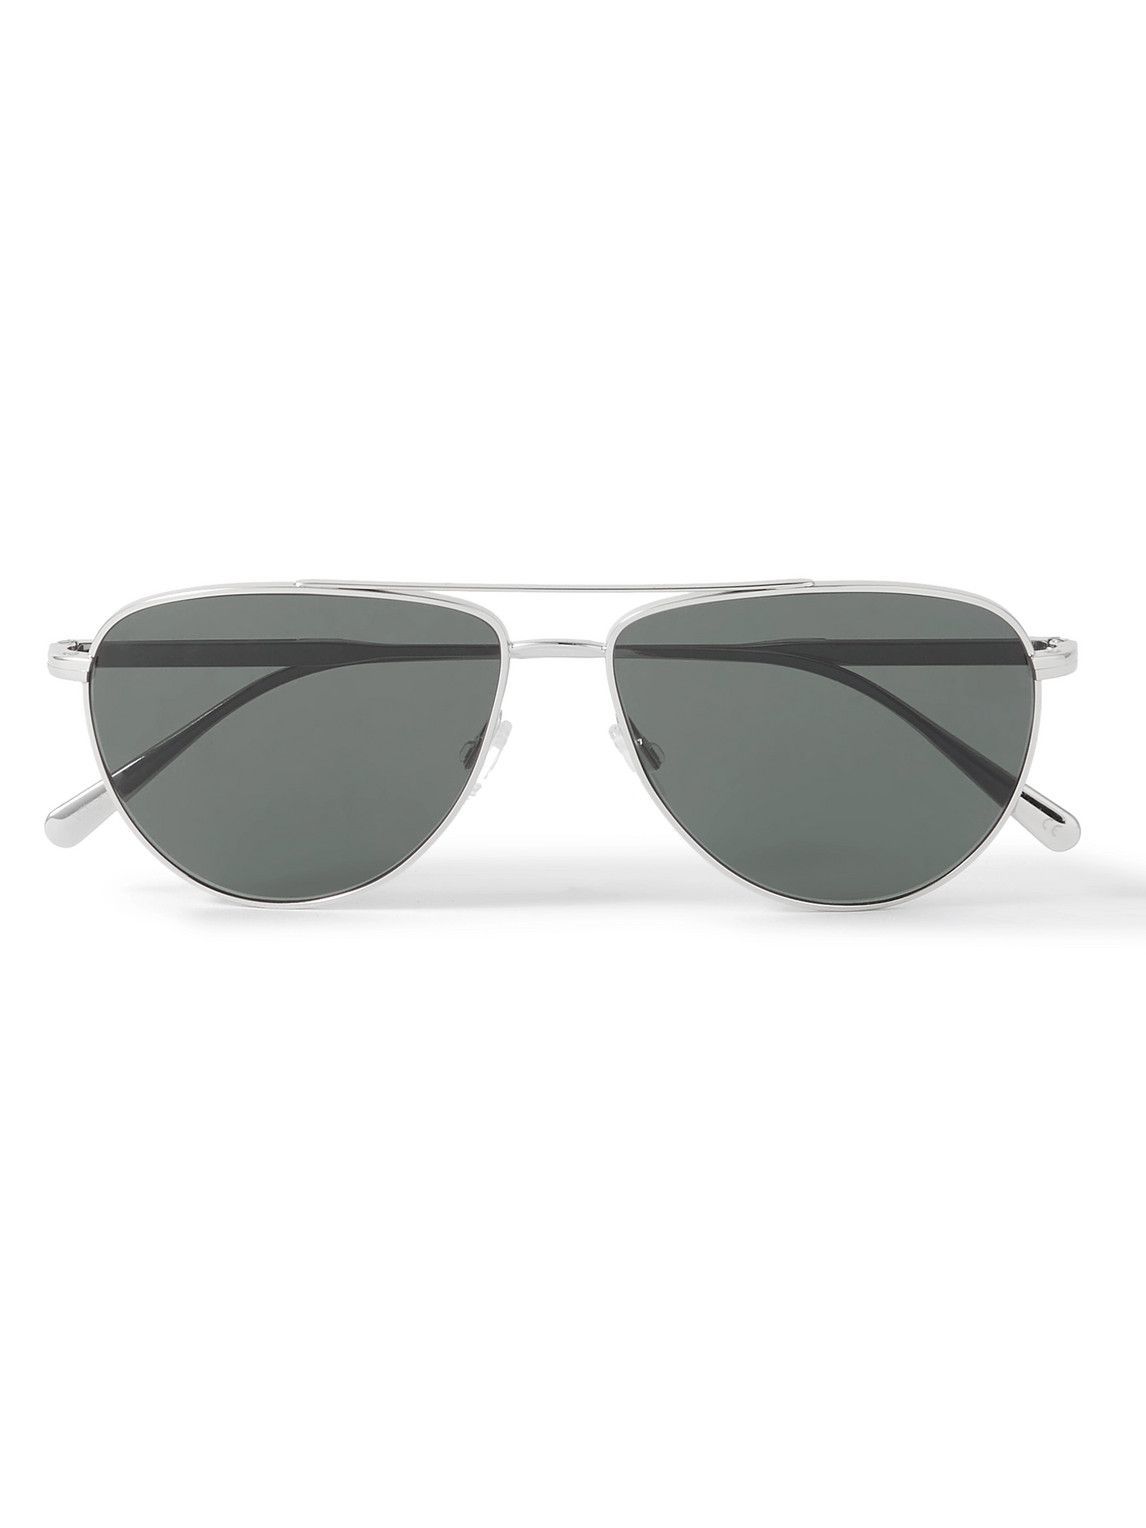 Brunello Cucinelli - Oliver Peoples Aviator-Style Silver-Tone ...